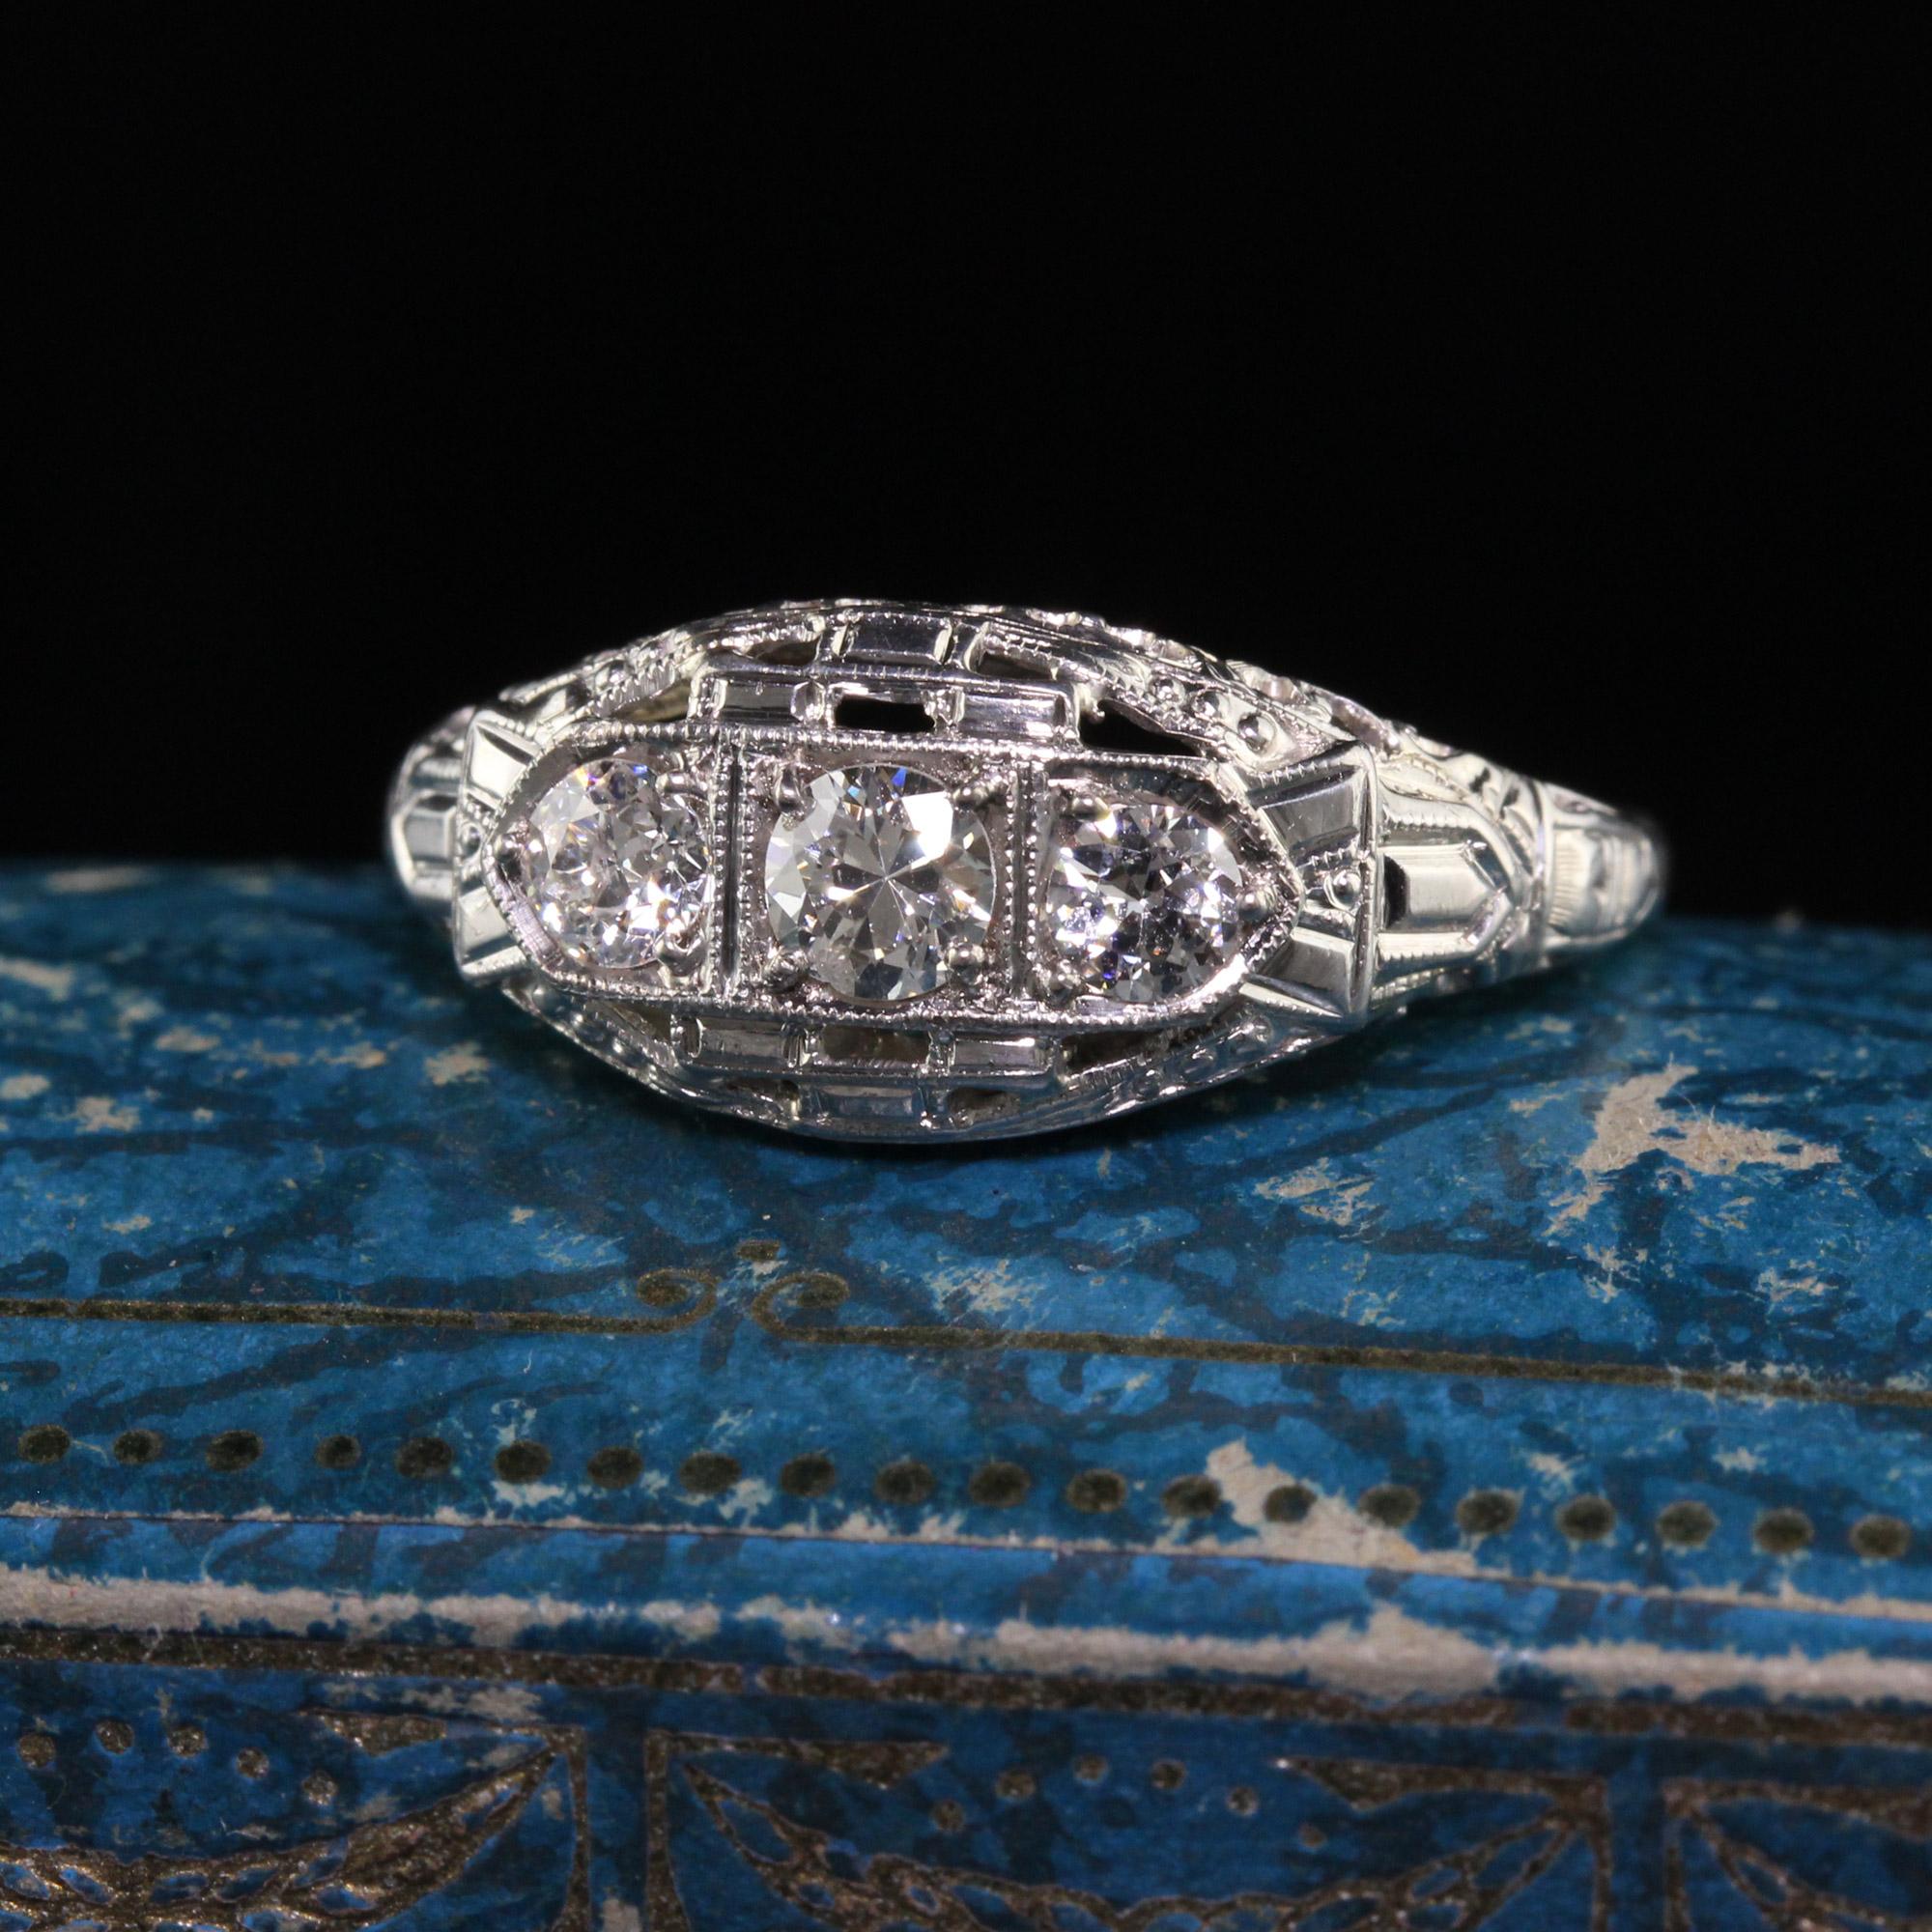 Beautiful Antique Art Deco 18K White Gold Old European Diamond Three Stone Ring. This gorgeous ring is crafted in 18k white gold. The center holds three old european cut diamonds in a beautiful filigree mounting. It is in great condition.

Item